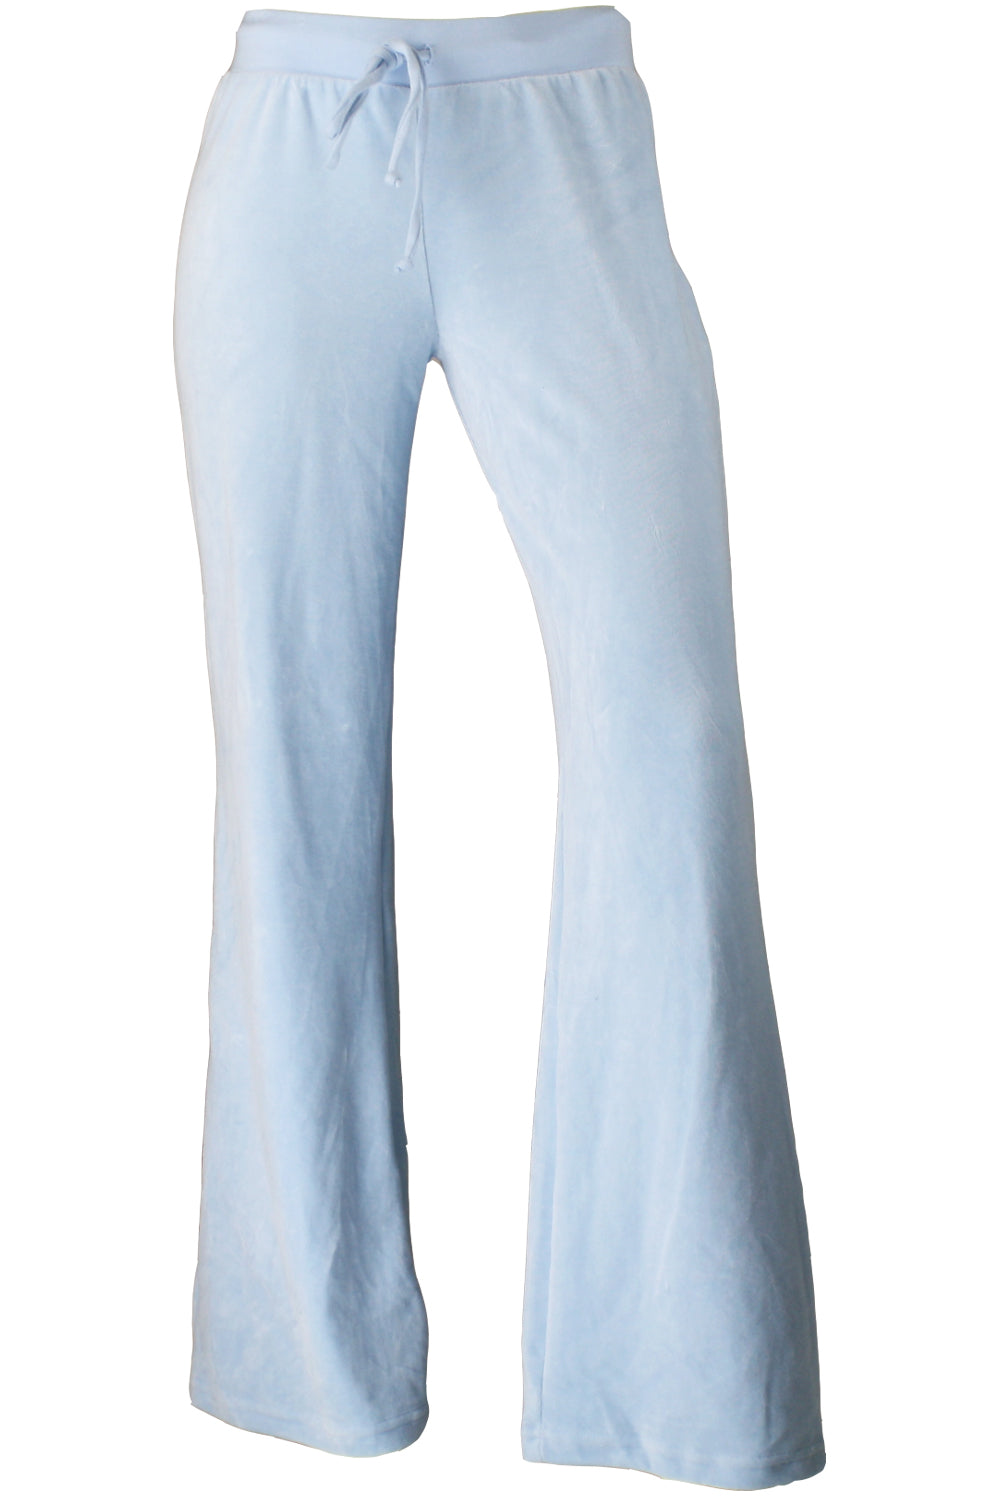 Light Blue Pants Outfits For Women Easy Simple And Fresh 2023   LadyFashionisercom